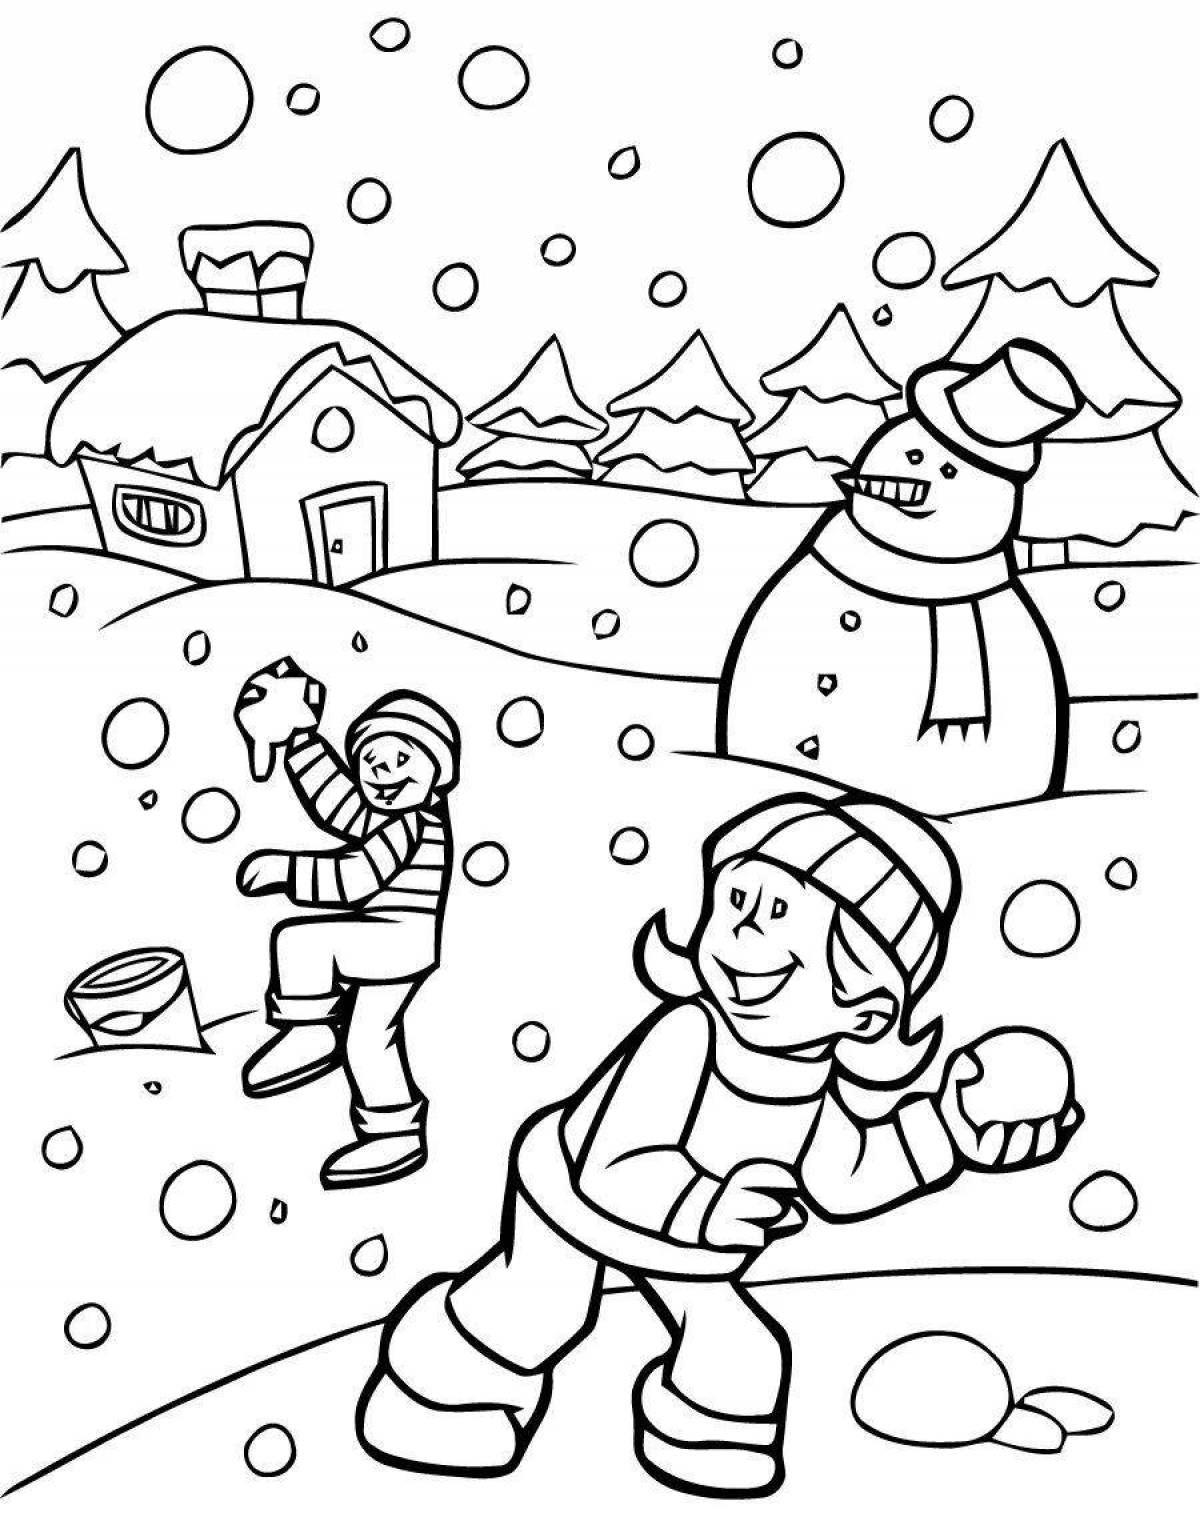 Glowing winter crystals coloring page